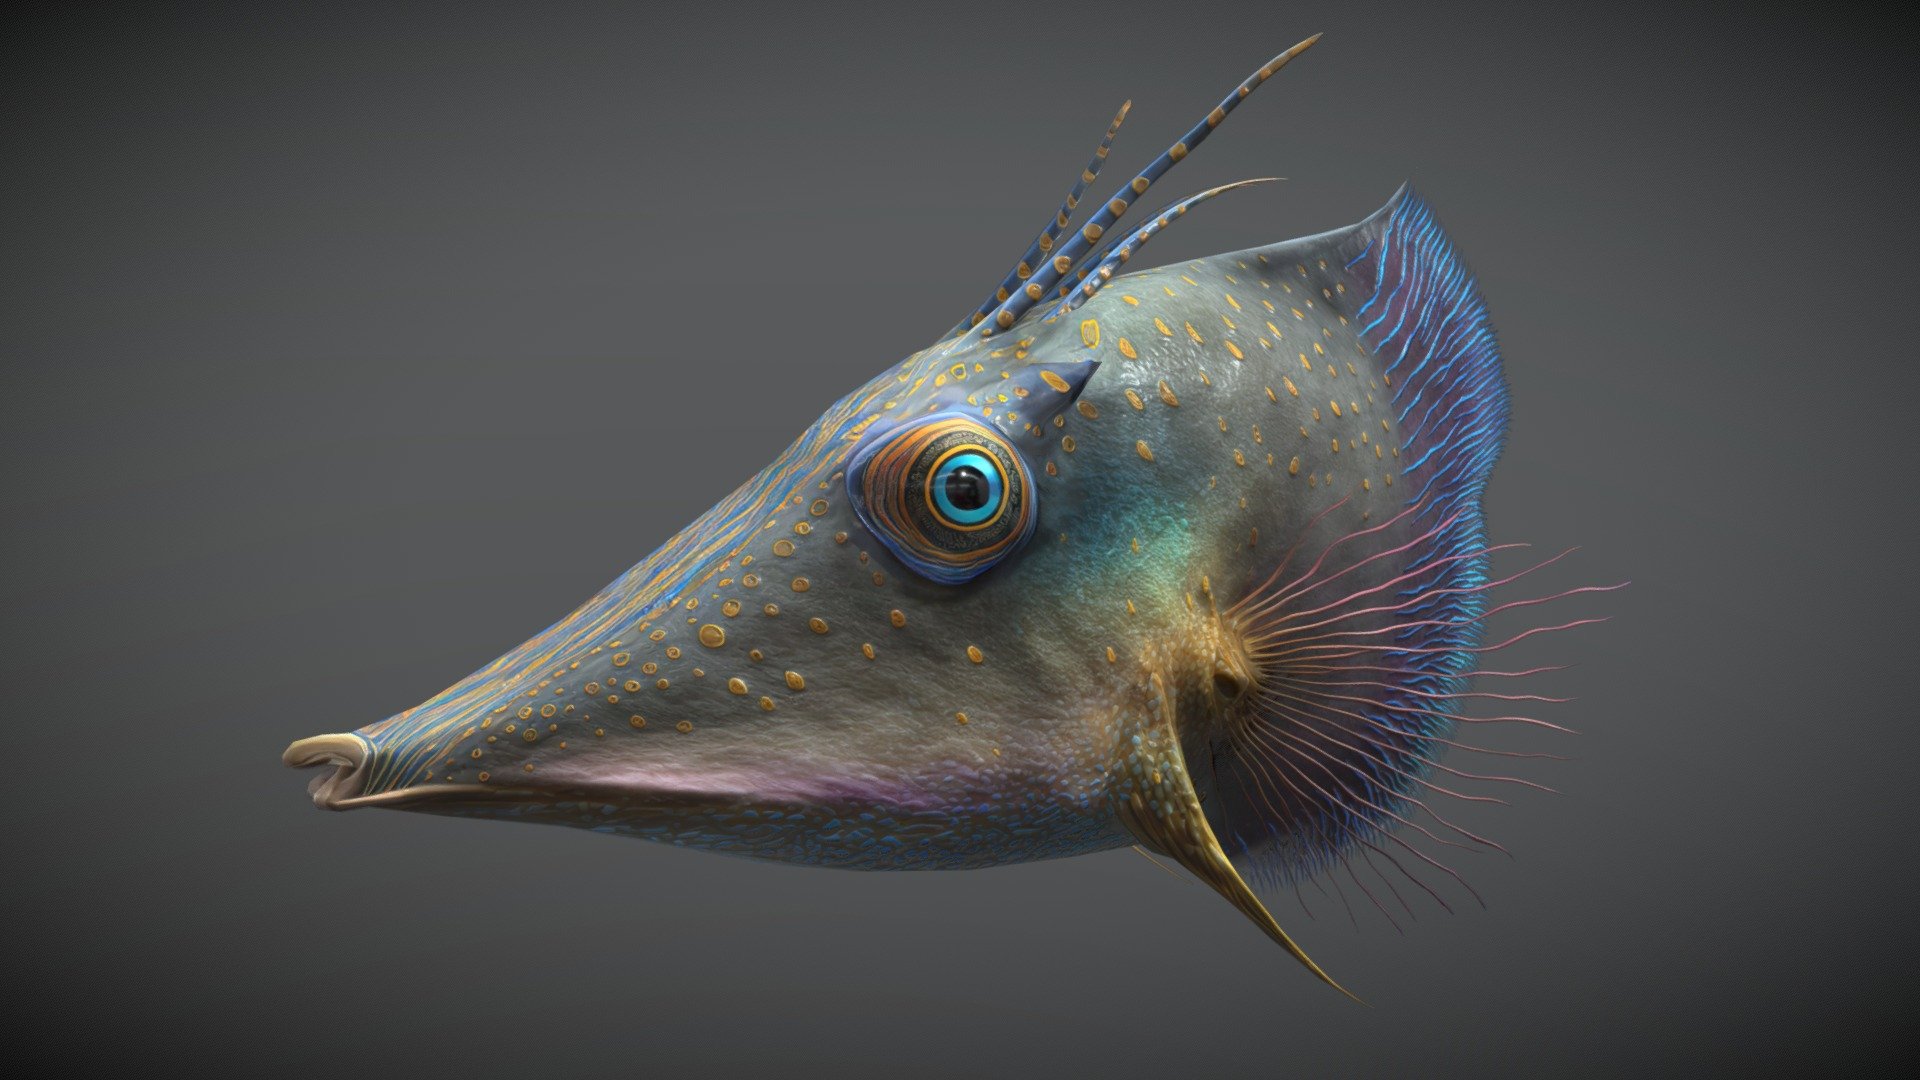 This one-of-a-kind creation boasts 4096x2048 textures, including a Diffuse Map, Normal Map, Opacity Map, and Eye Mask Texture, and has its Diffuse Texture baked with Photo-realistic Lighting, giving it unparalleled realism and depth.
Whether you're an aquarium enthusiast or sci-fi fan, this exotic fish will add a touch of the unknown to your collection.
Get your Alien Tropical Fish today and let the adventure begin!

If you like this asset, be sure to check out my full collection of Alien Ocean Animals!

Click Here to view more Alien Fish - Alien Fish Fantasy Creature - Buy Royalty Free 3D model by Davis3D 3d model